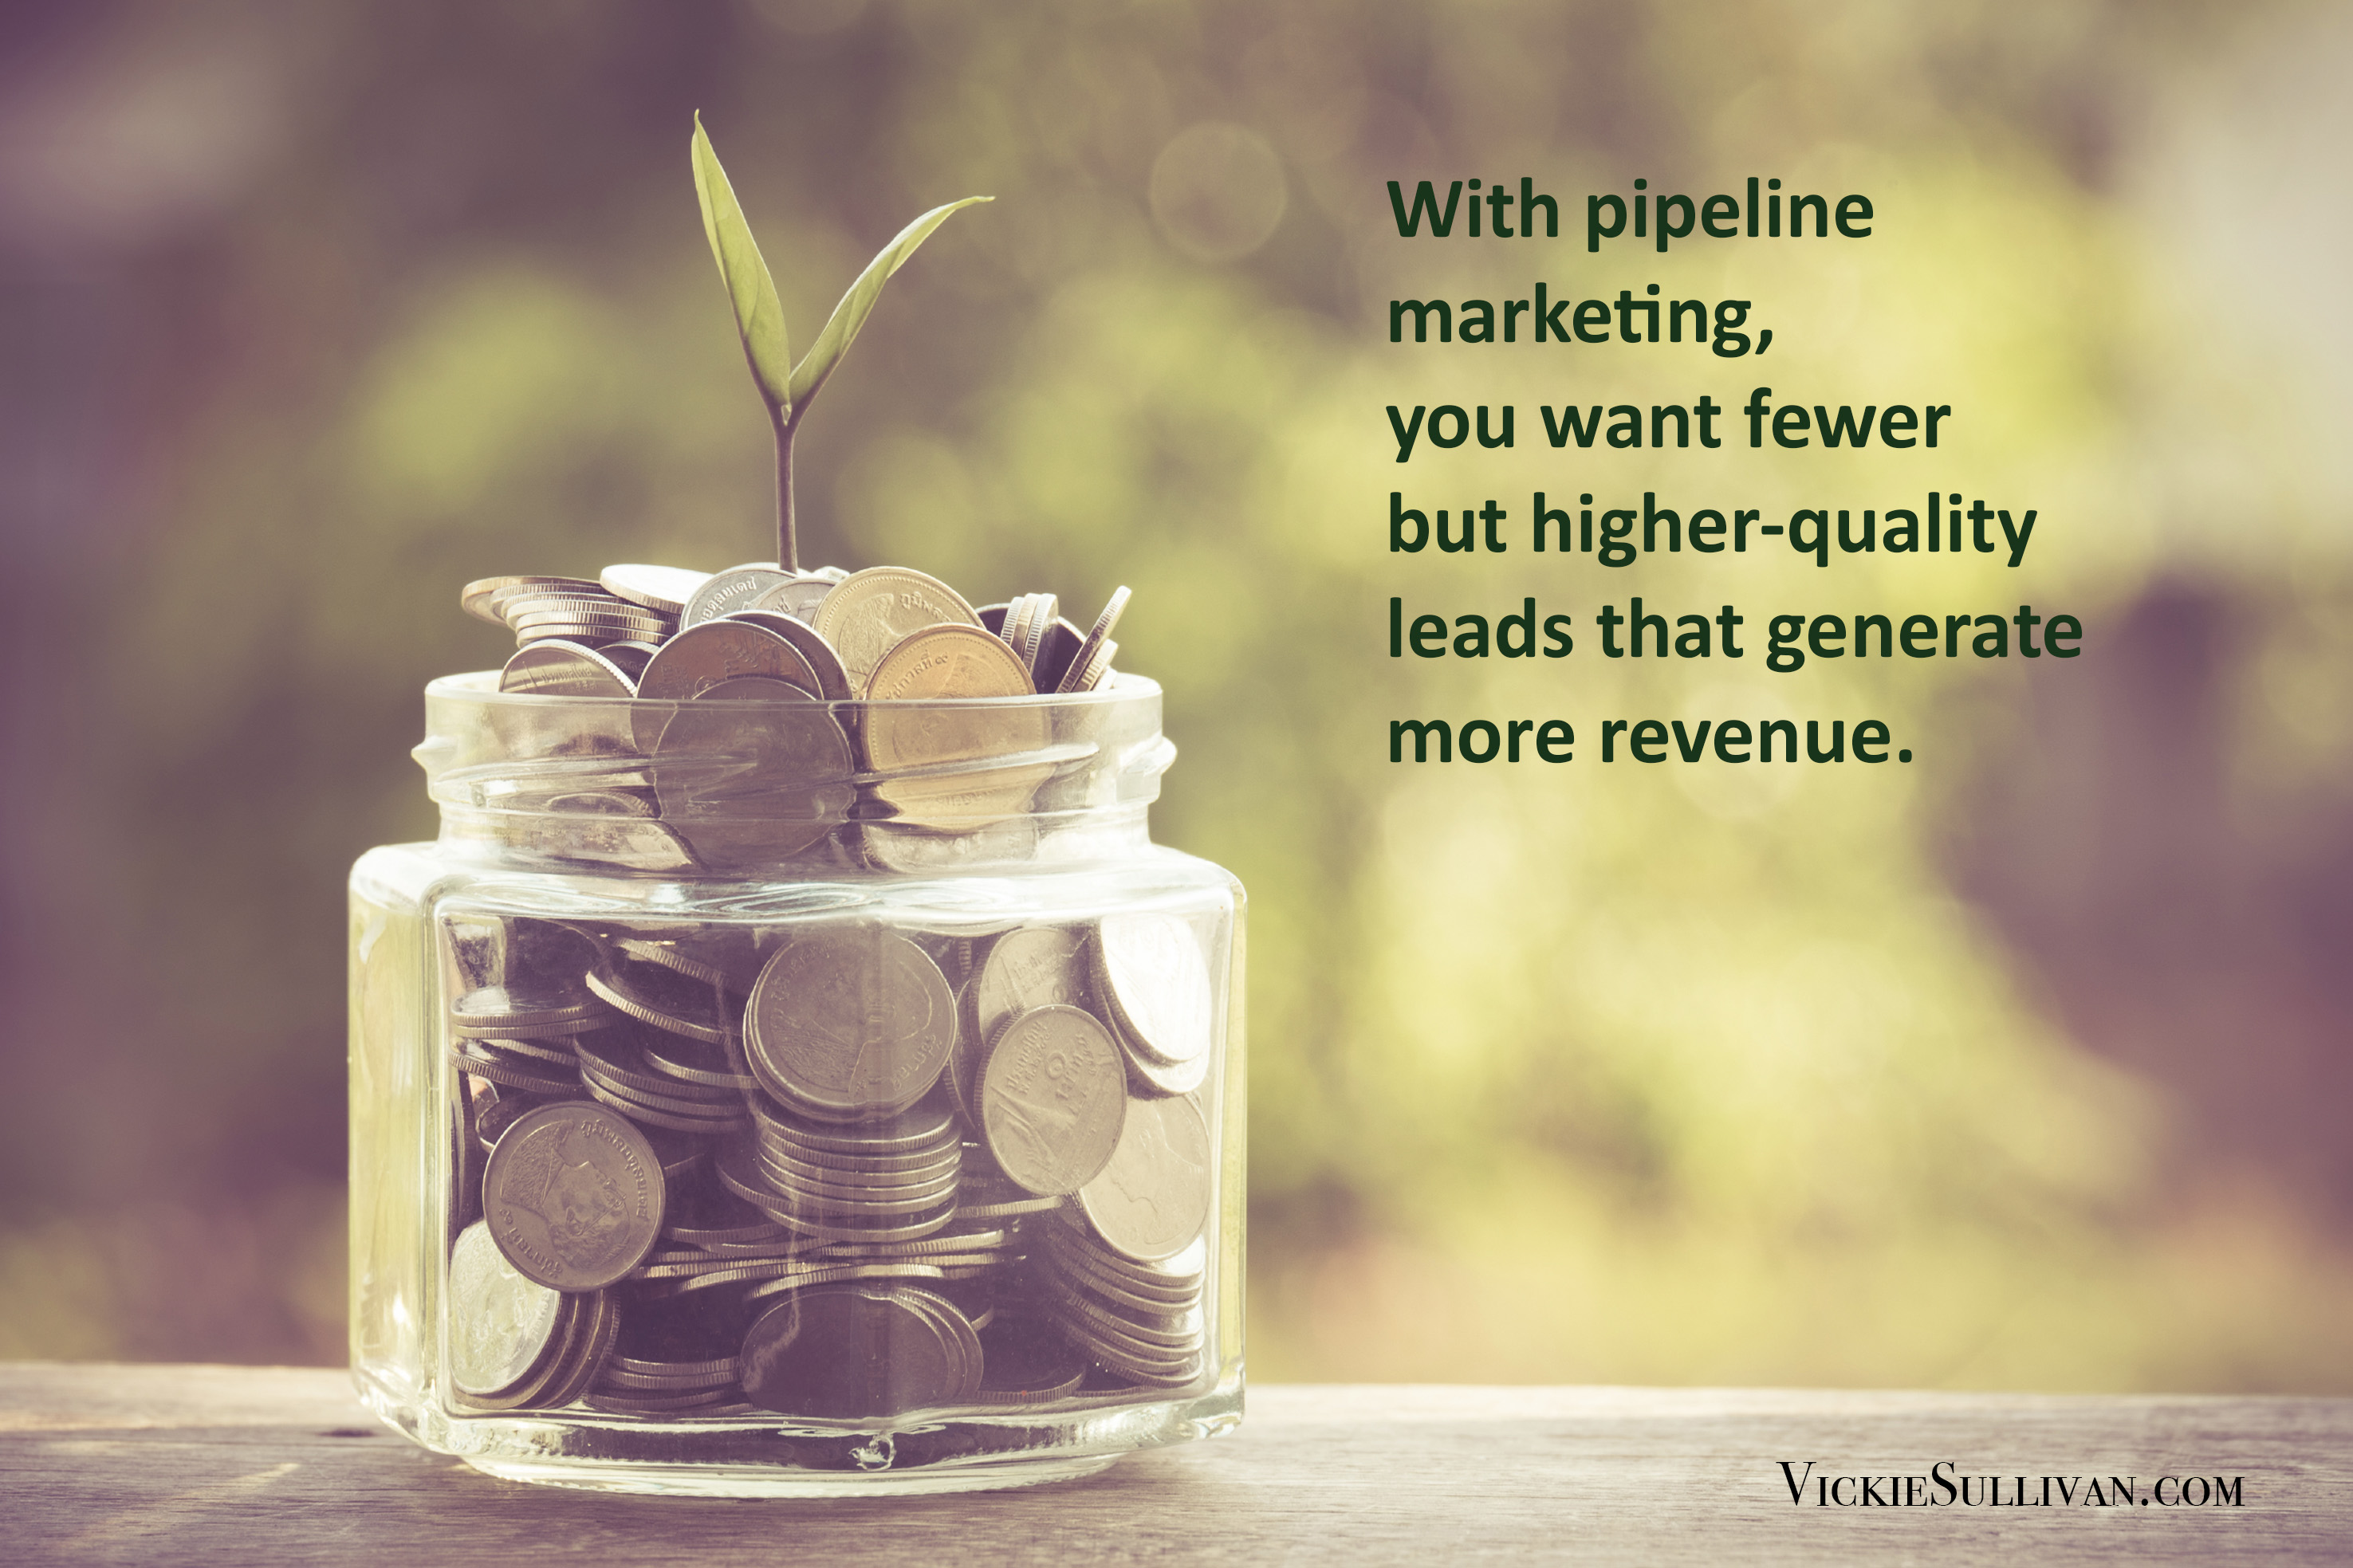 With pipeline marketing, you want fewer but higher-quality leads that generate more revenue.